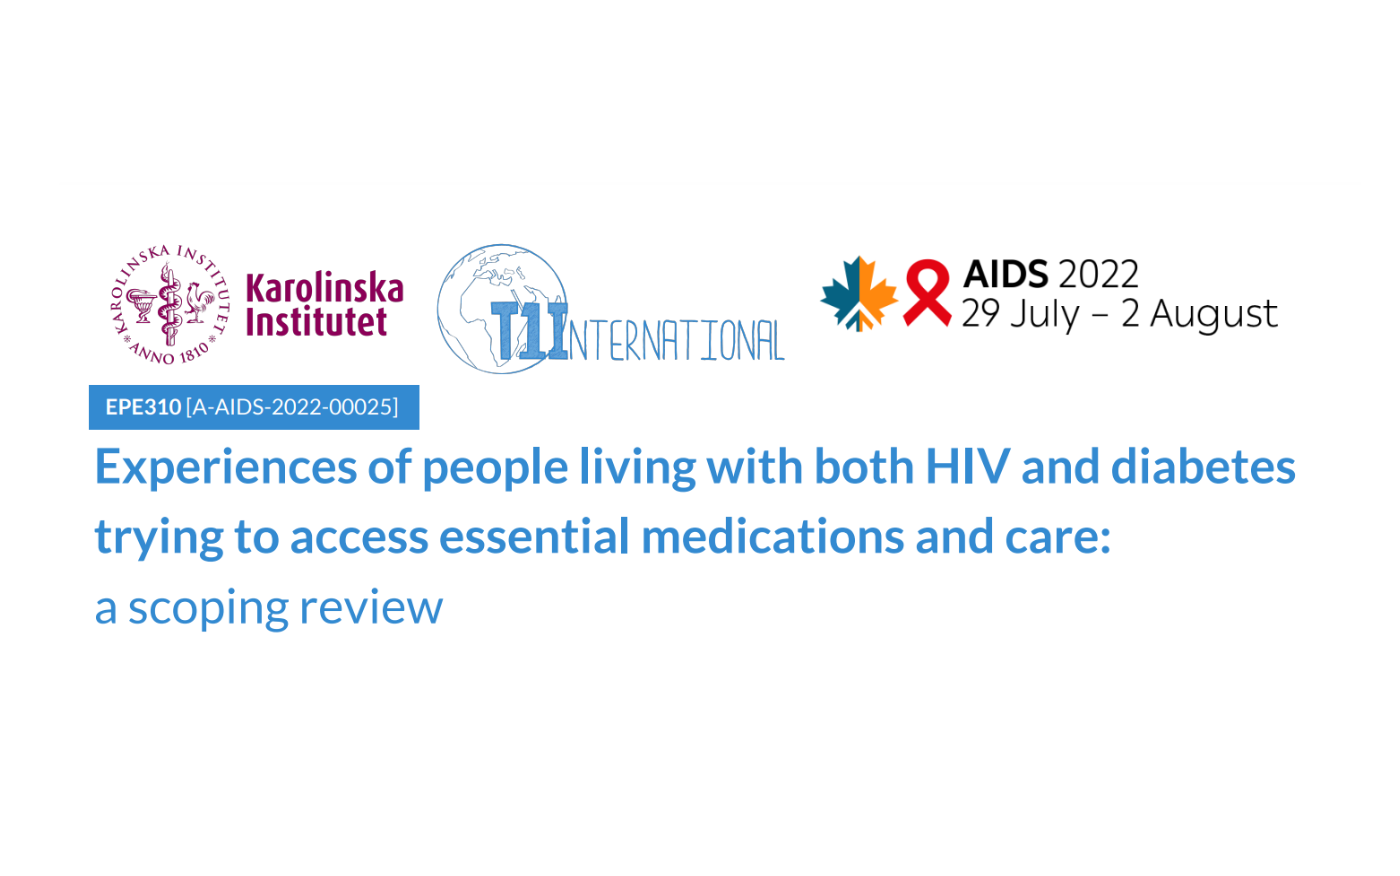 Experiences of people living with both HIV and diabetes trying to access essential medications and care: a scoping review